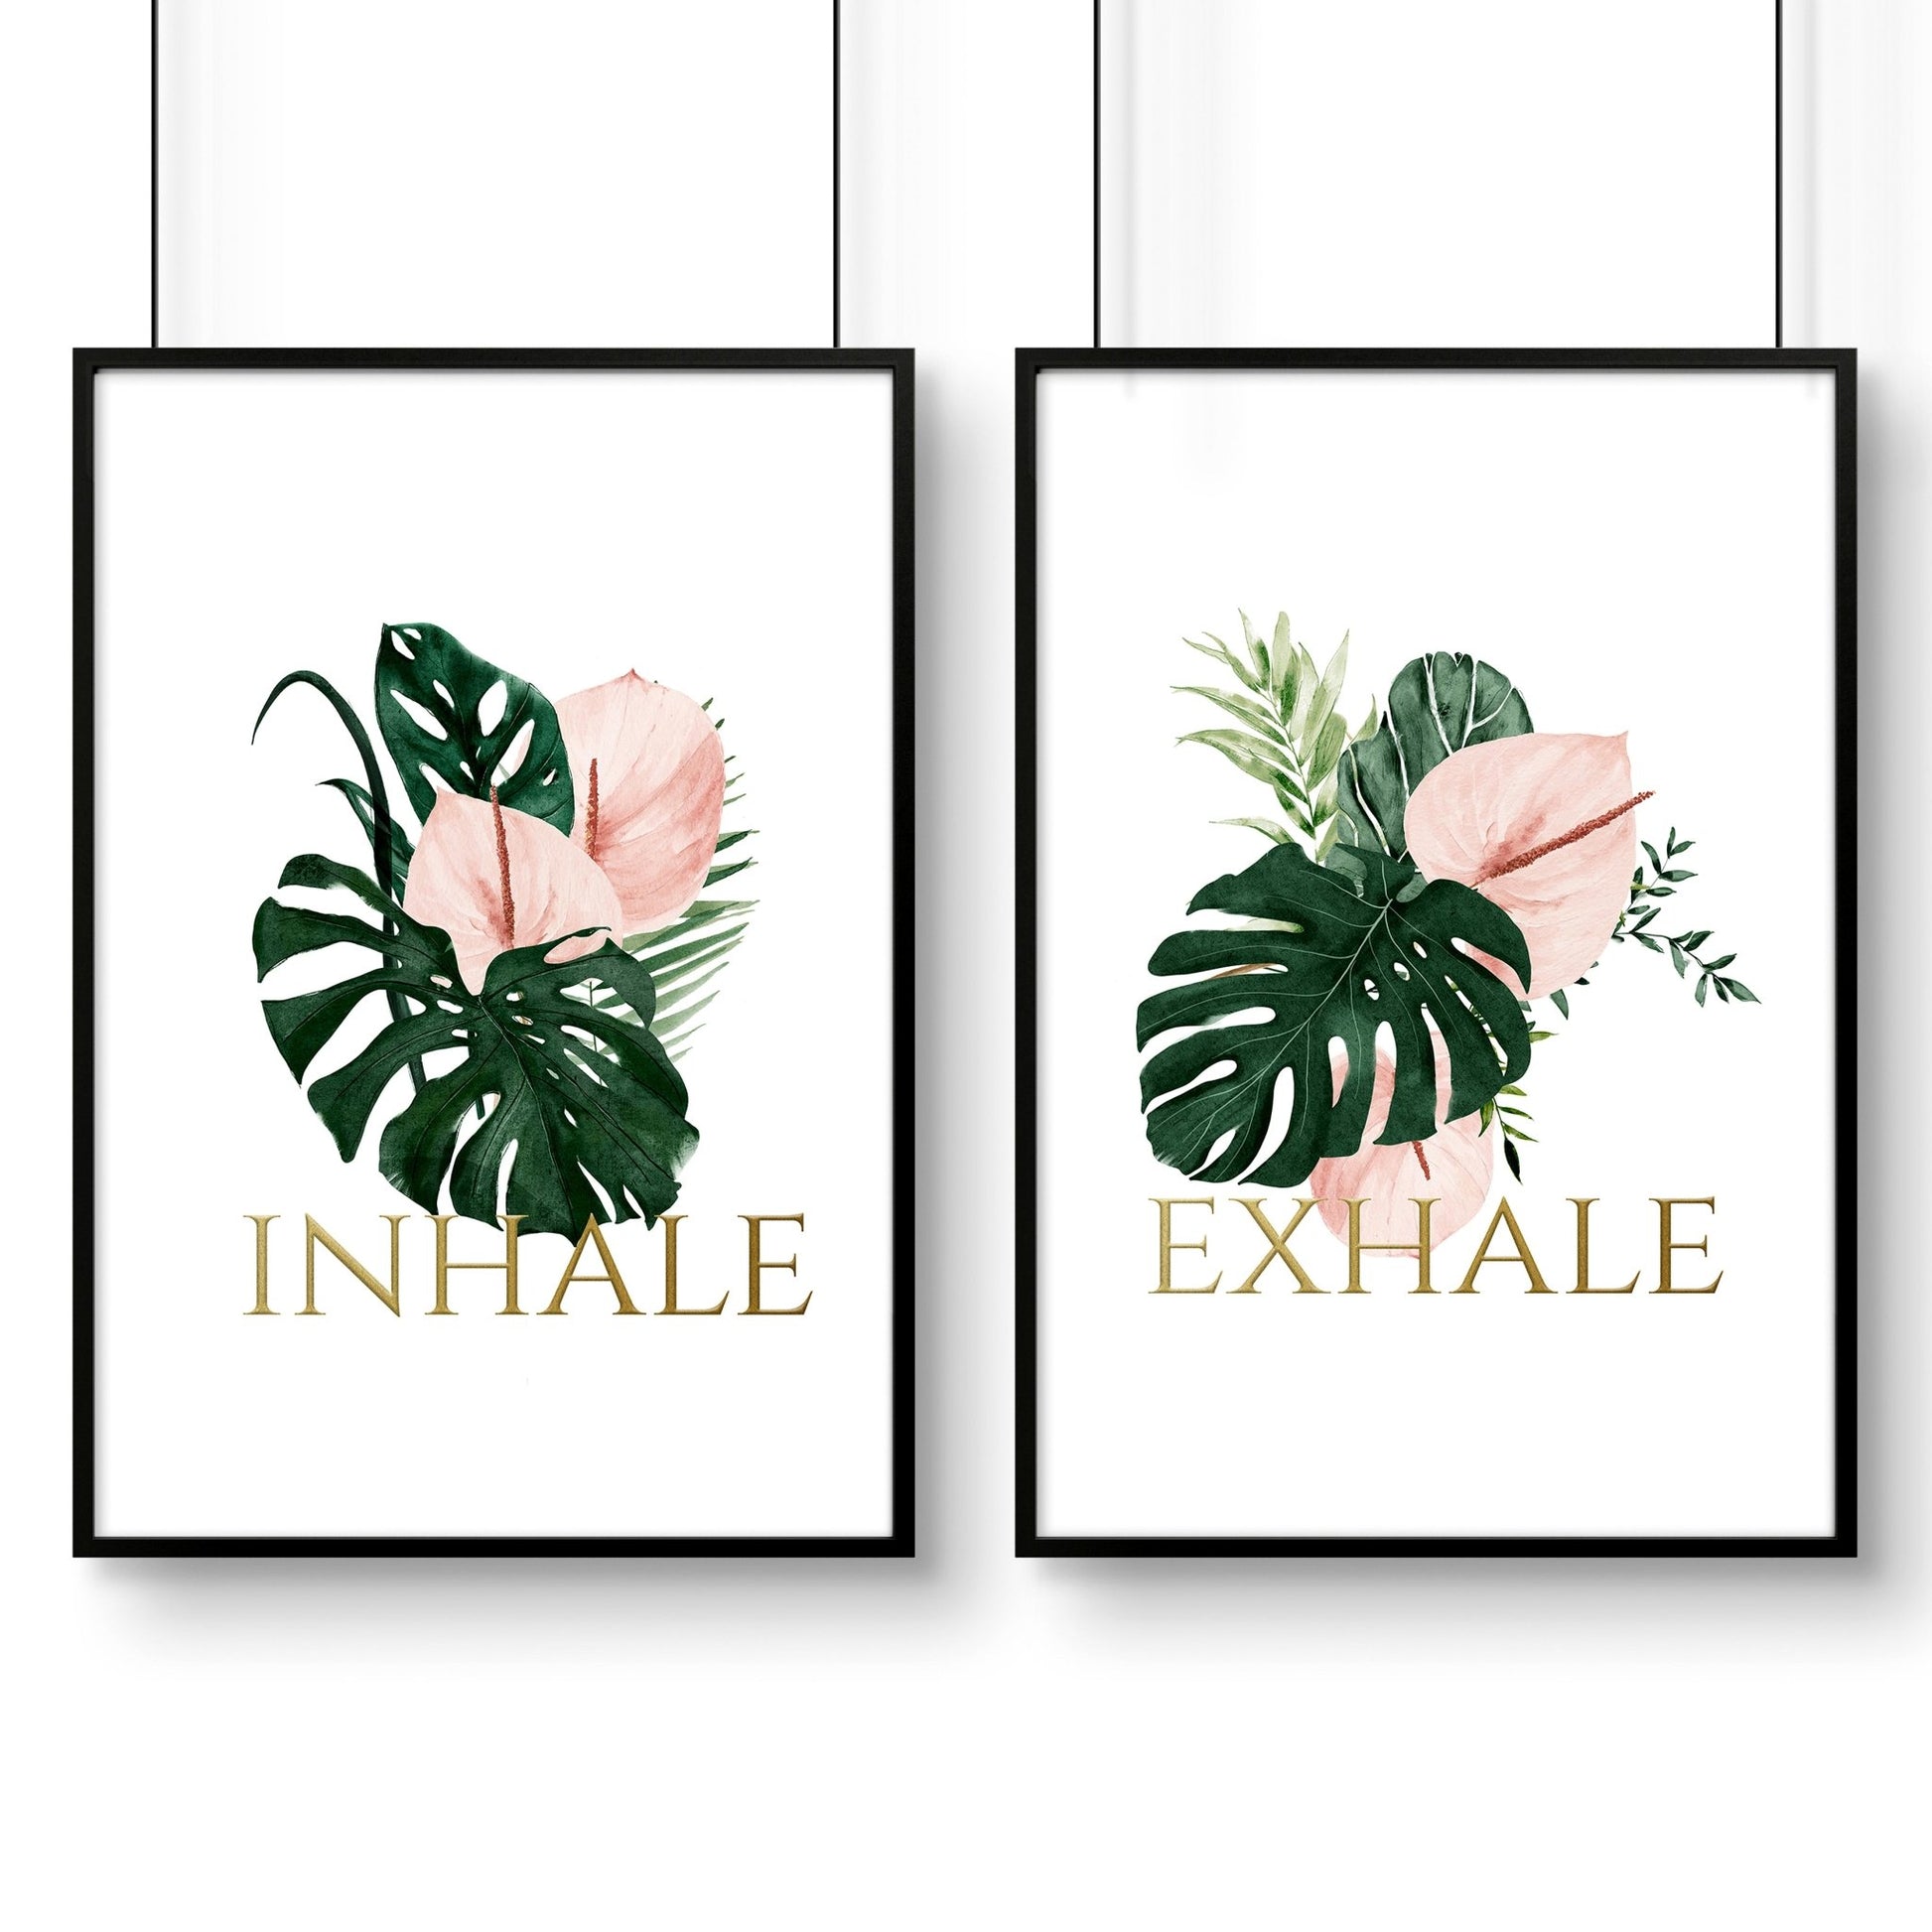 Relaxation wall art | set of 2 wall art prints for bathroom - About Wall Art